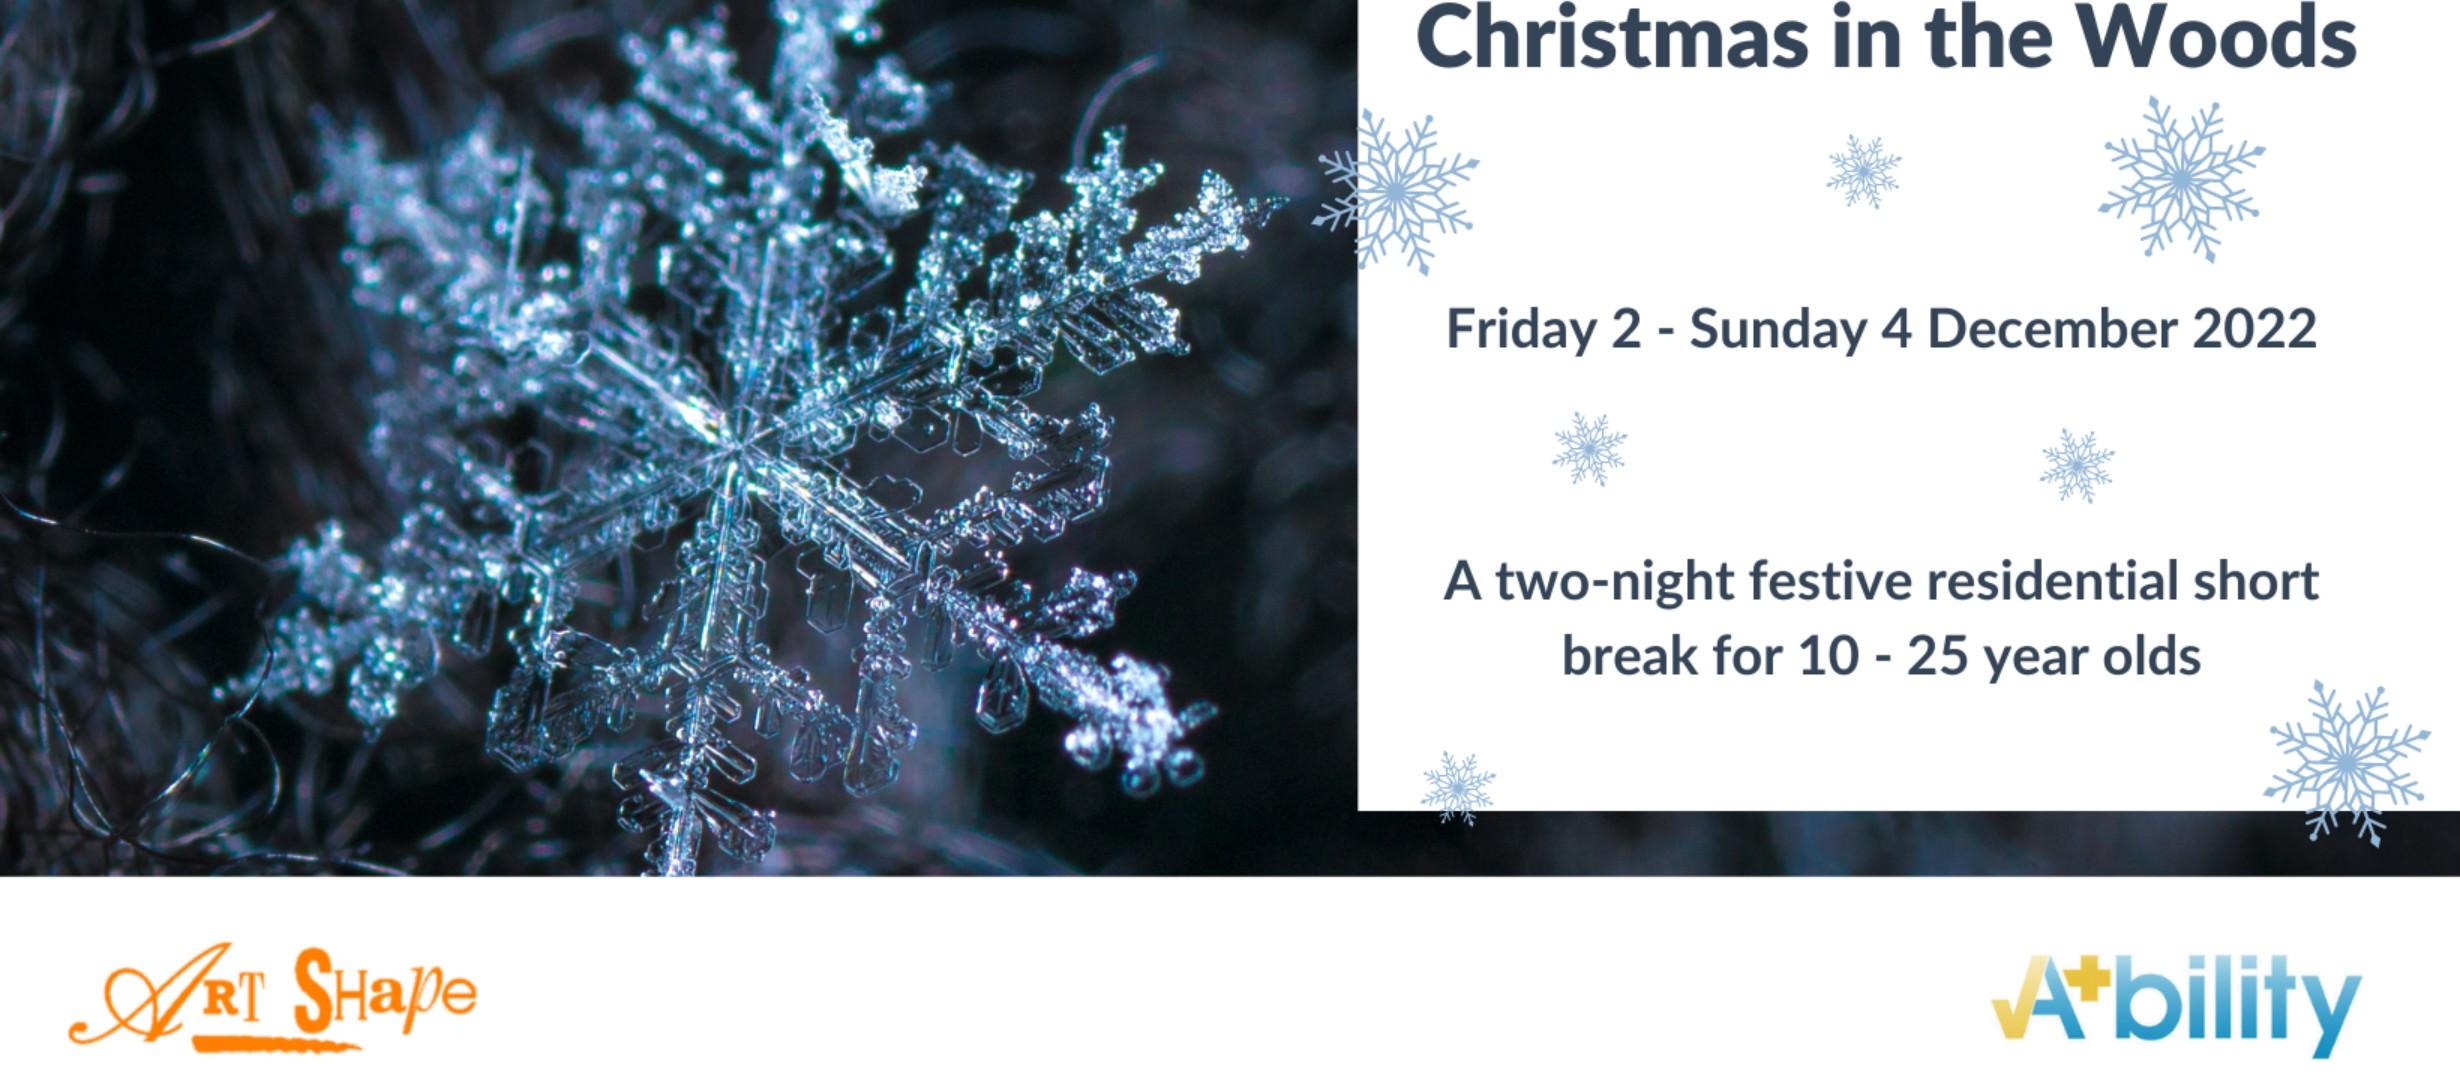 Snowflake on dark blue background. Art Shape and Ability logos. Text: Christmas in the Woods. Friday 2 - Sunday 4 December 2022. A two night festive residential short break for 10 - 25 year olds.